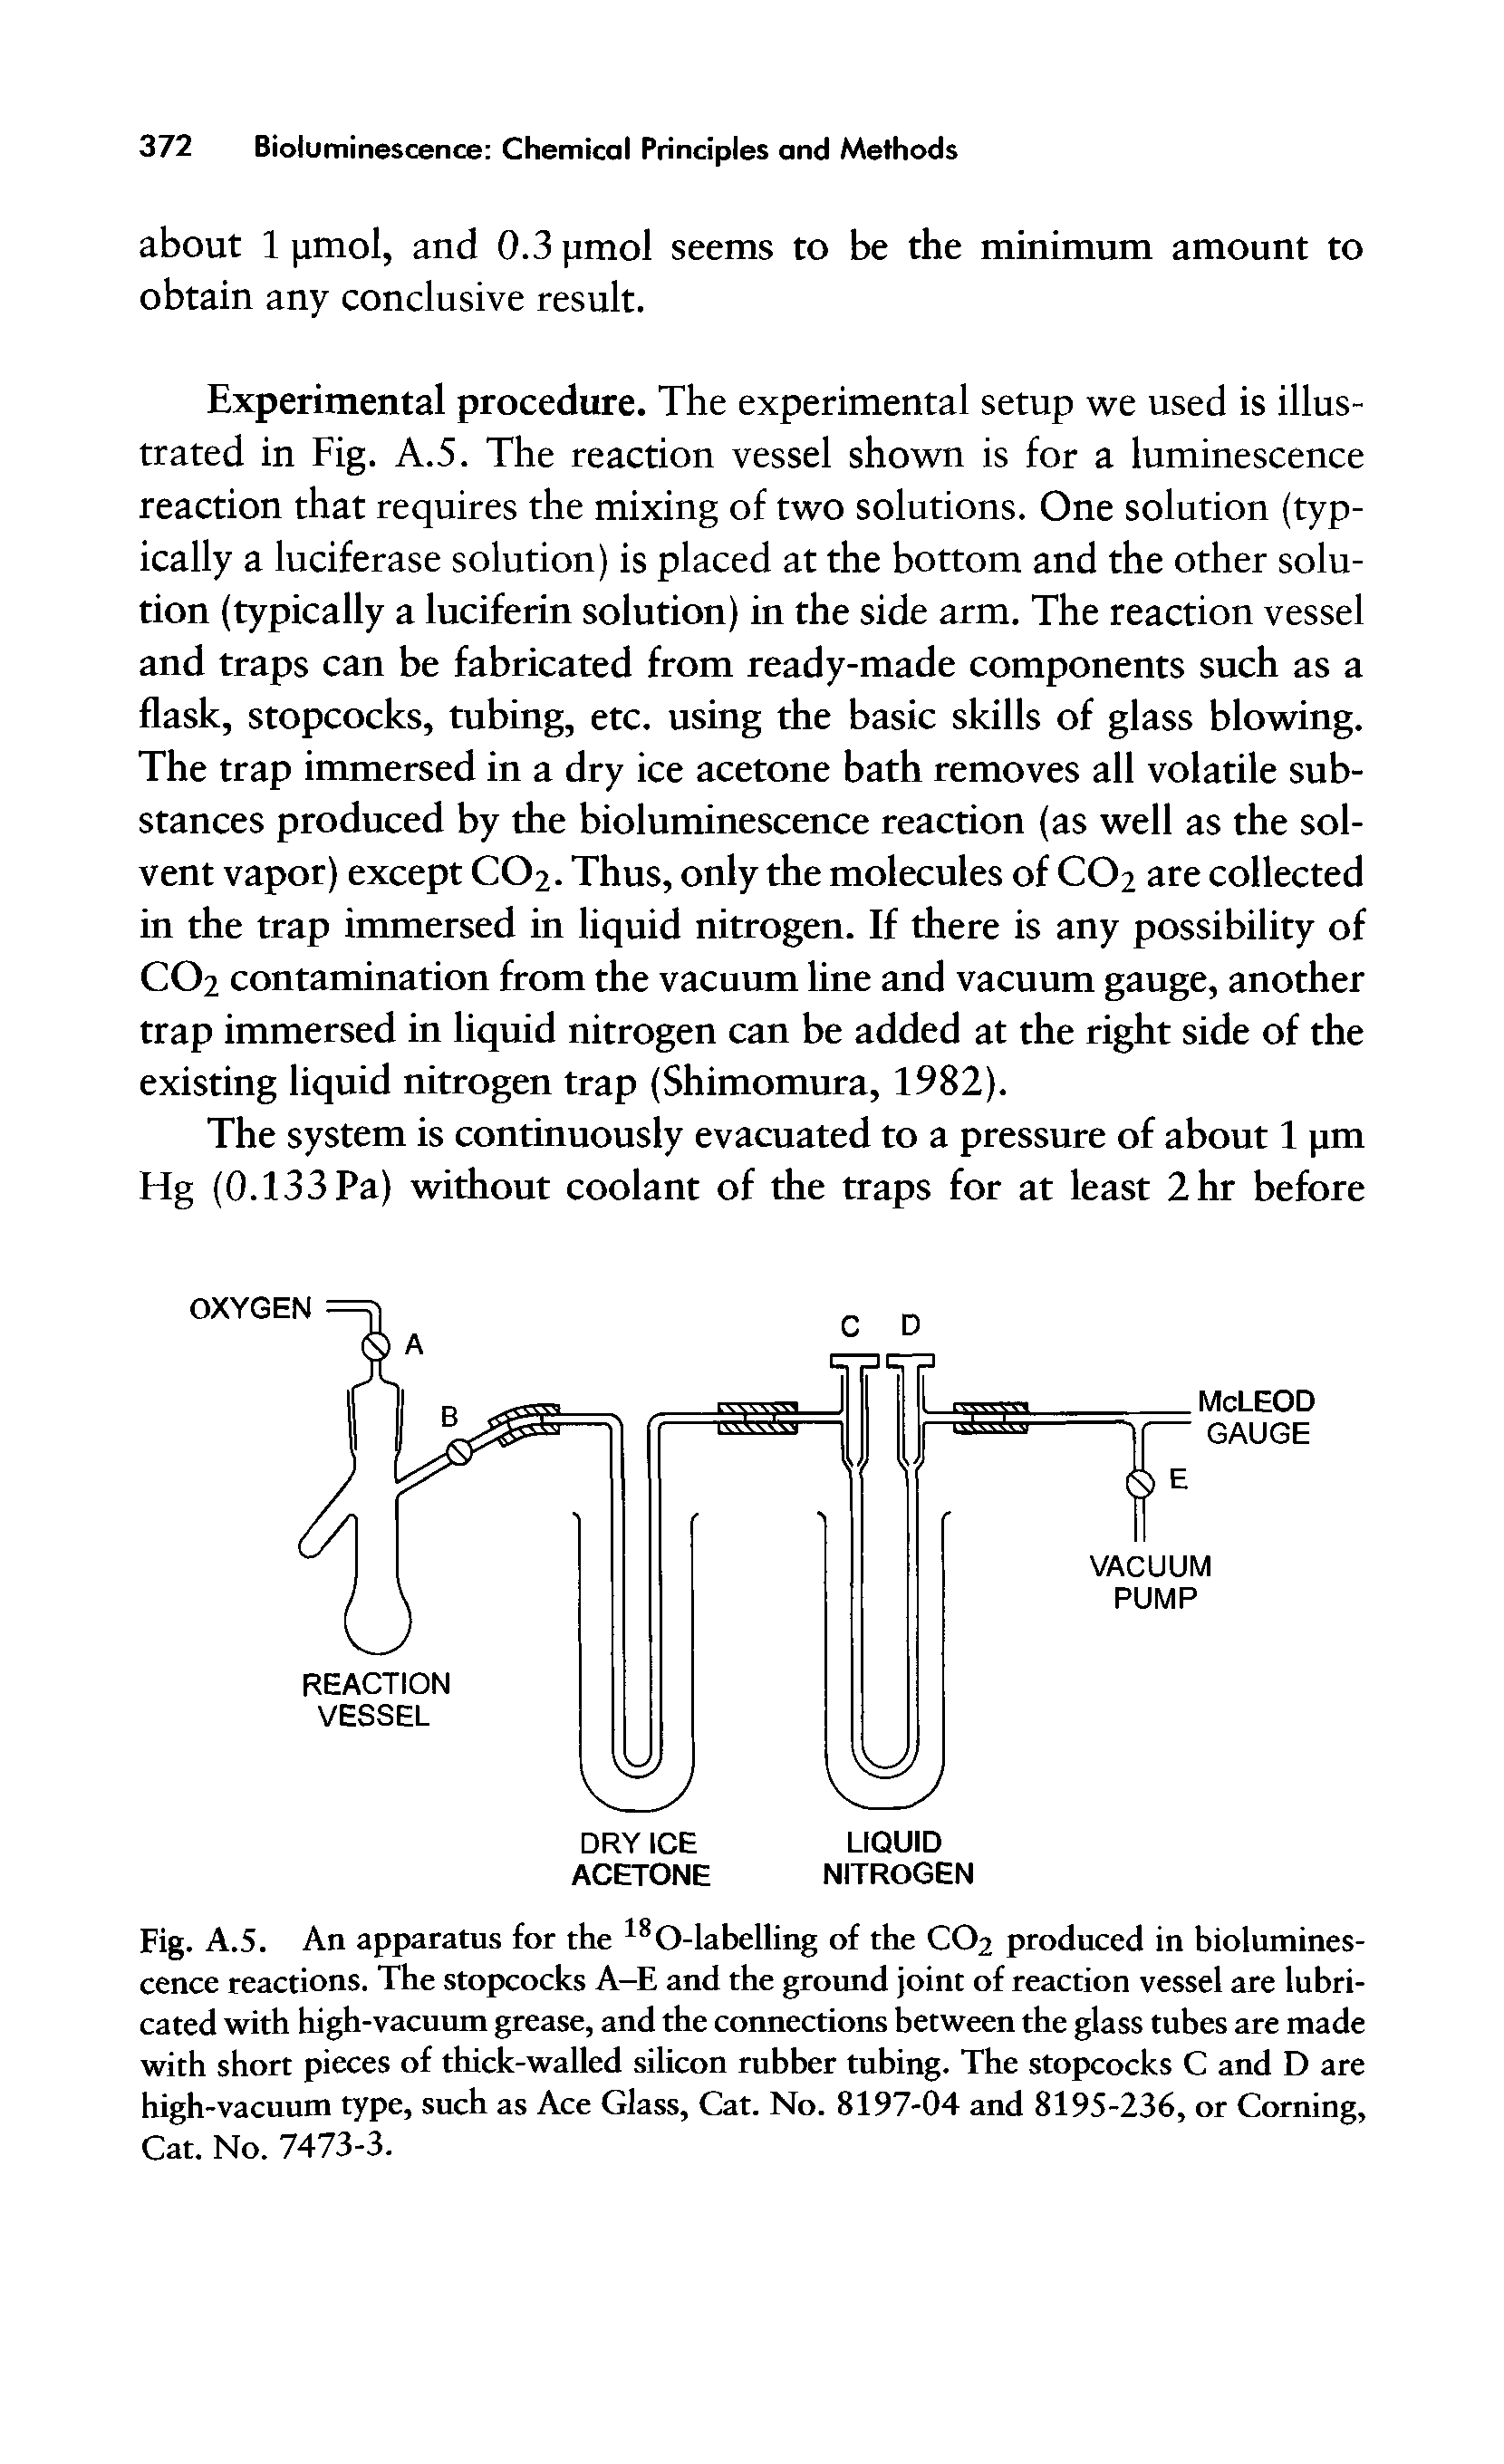 Fig. A.5. An apparatus for the lsO-labclling of the CO2 produced in biolumines-cence reactions. The stopcocks A-E and the ground joint of reaction vessel are lubricated with high-vacuum grease, and the connections between the glass tubes are made with short pieces of thick-walled silicon rubber tubing. The stopcocks C and D are high-vacuum type, such as Ace Glass, Cat. No. 8197-04 and 8195-236, or Corning, Cat. No. 7473-3.